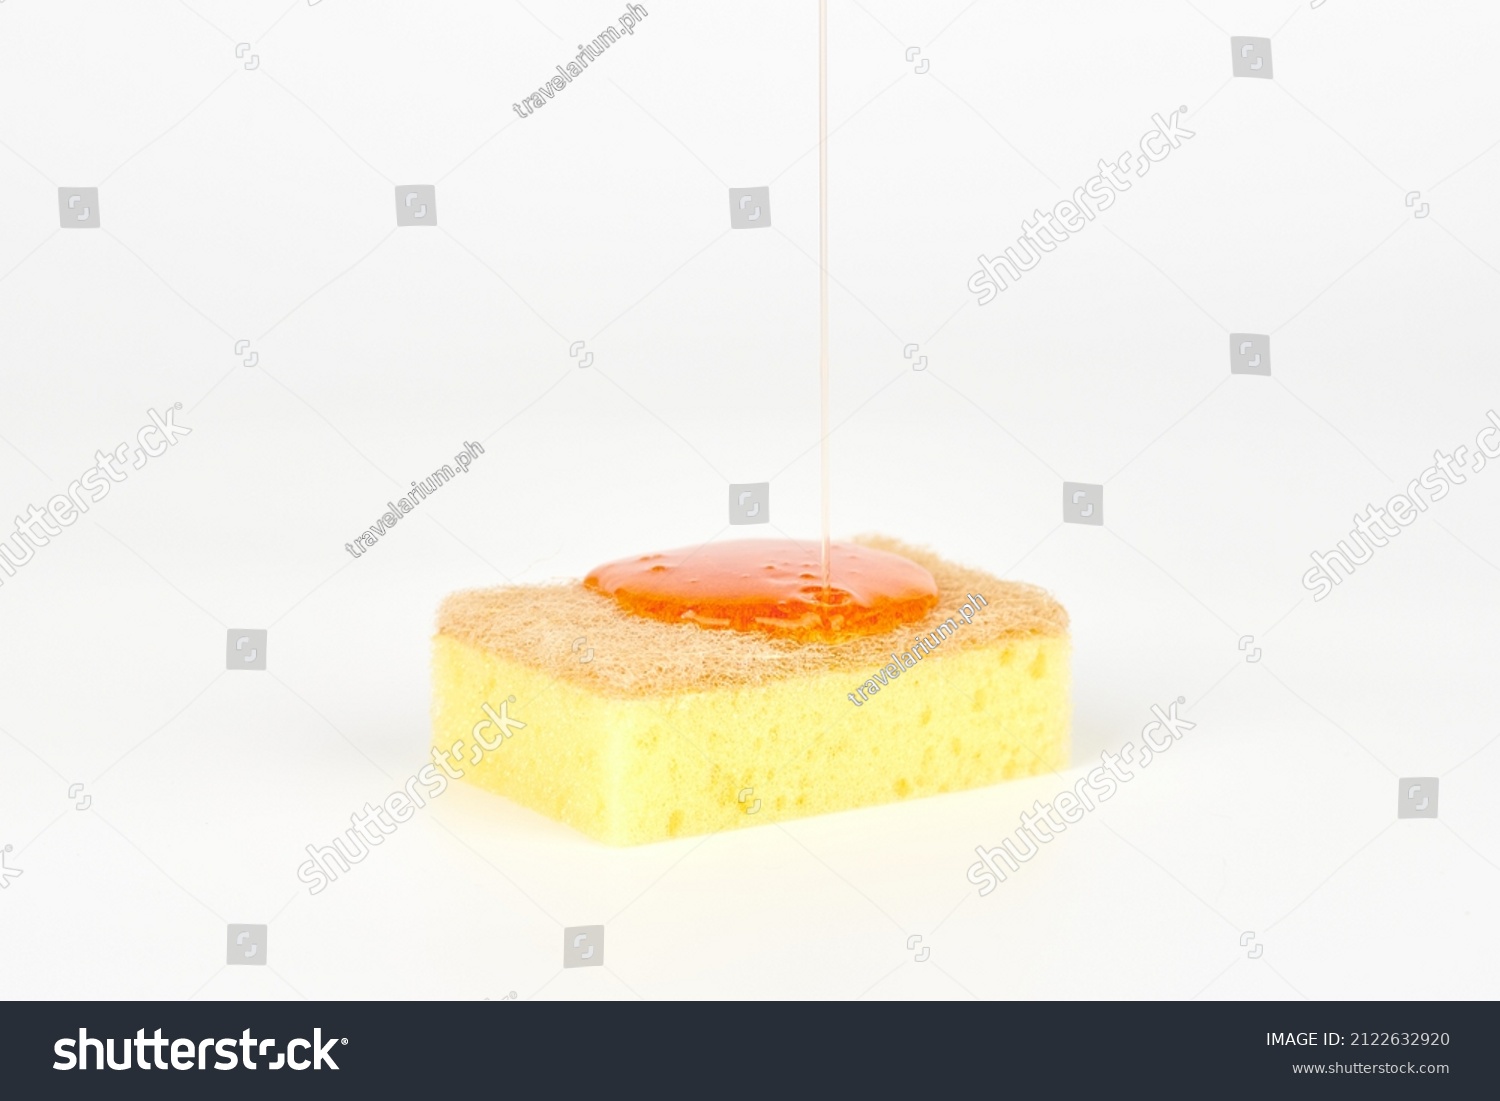 Pouring orange detergent on sponge isolated on white background. Orange liquid dish soap on sponge, home cleaning concept. Dishwashing sponge for general cleaning day #2122632920